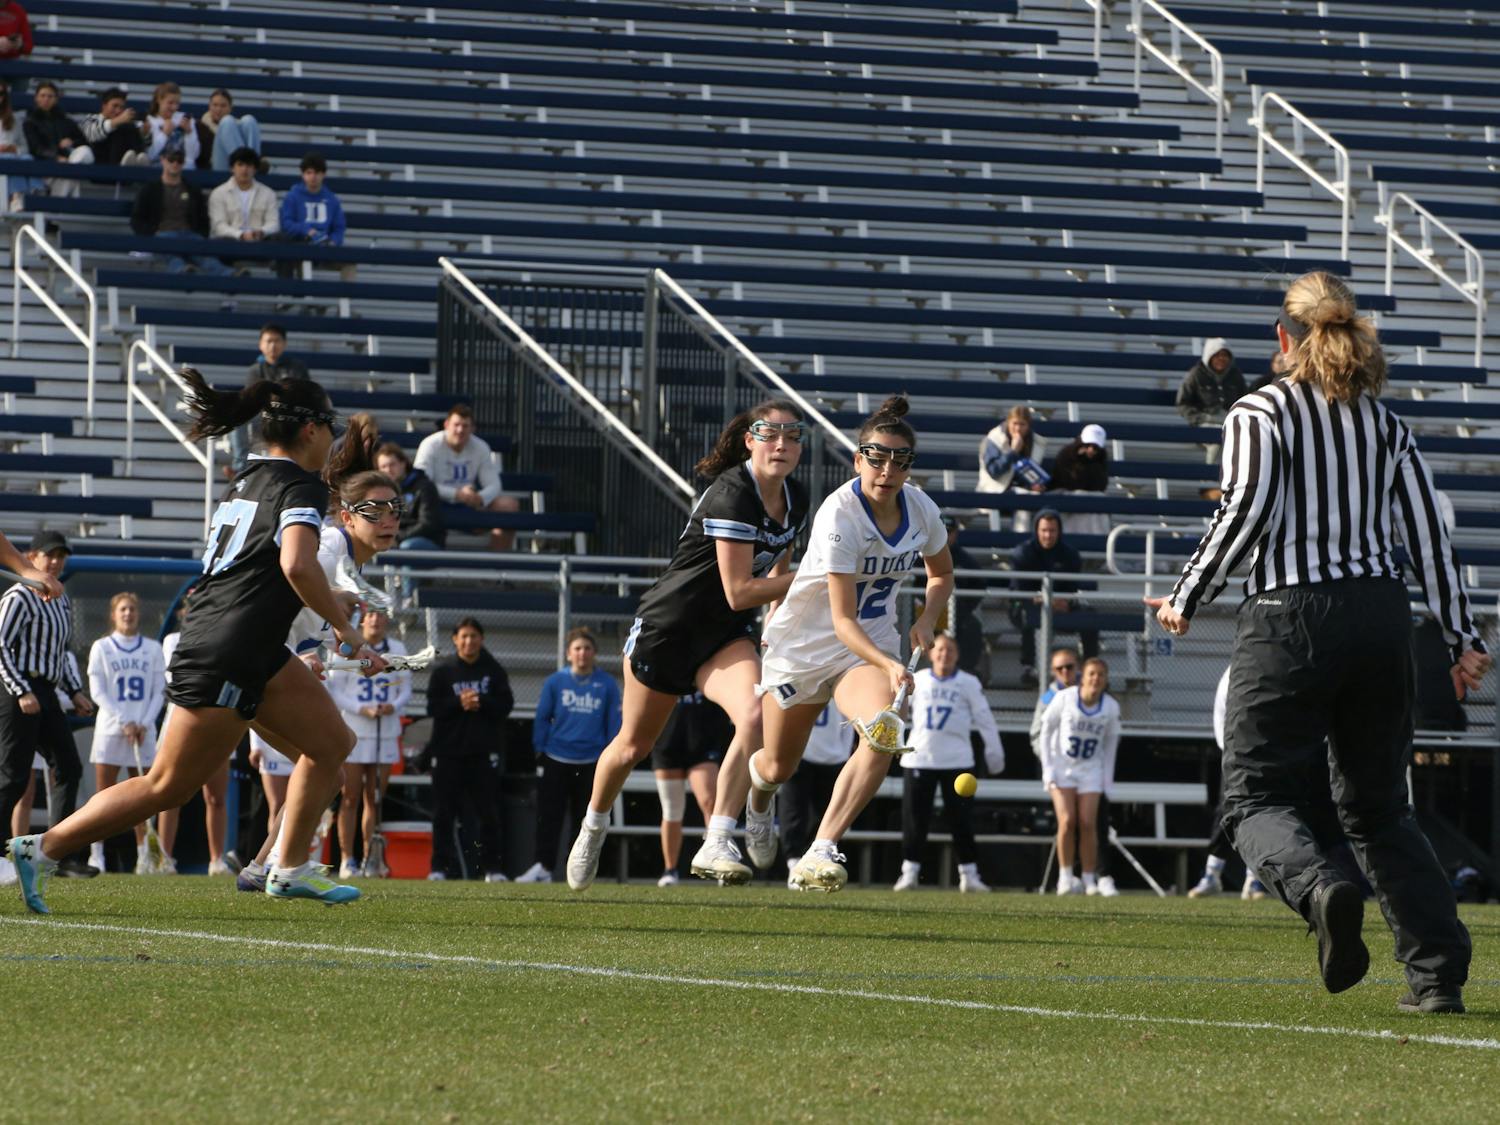 Olivia Carner chases after the ball during Duke's loss to Johns Hopkins.